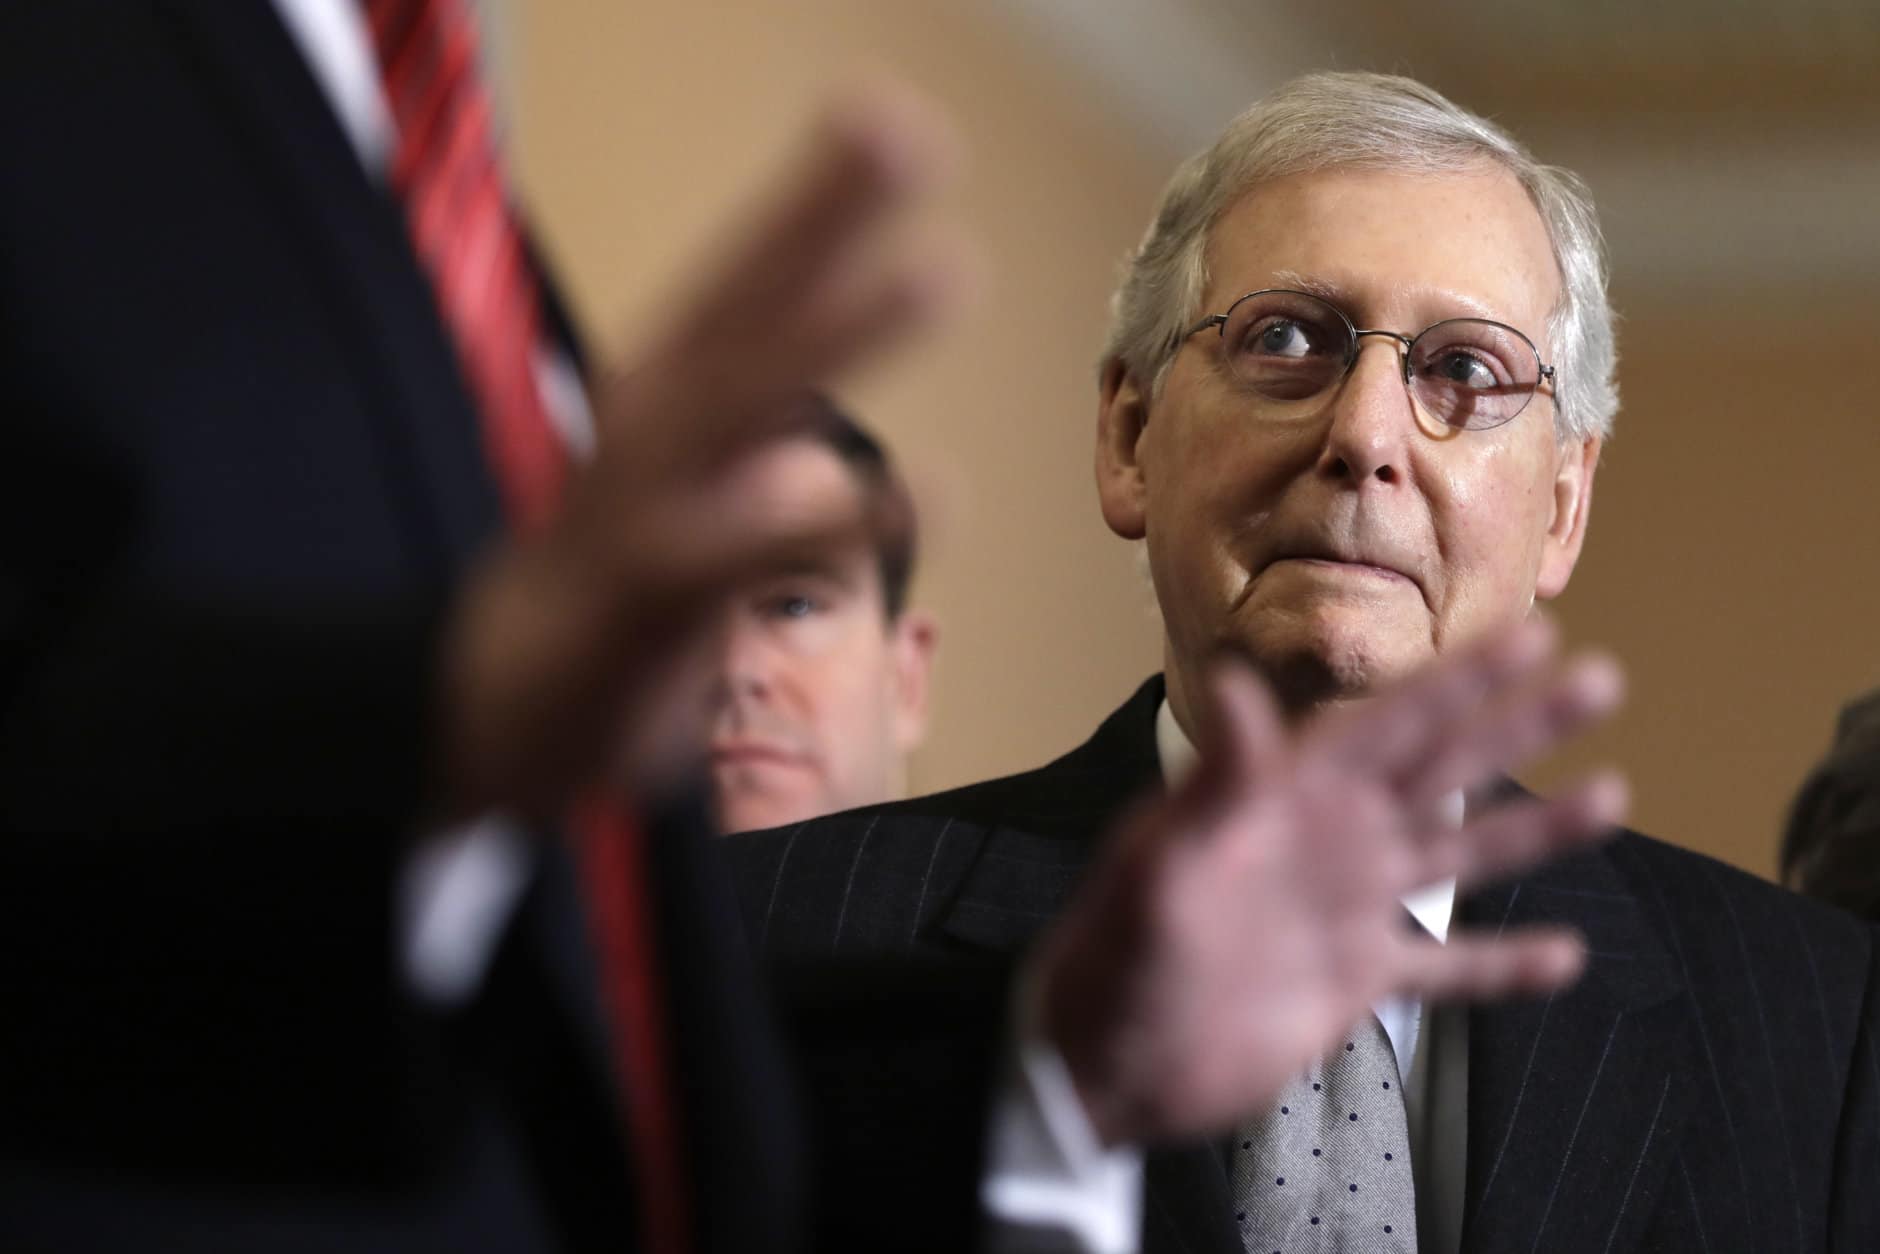 Senate Majority Leader Mitch McConnell of Ky., listens as President Donald Trump talks to the media after a Senate Republican policy lunch on Capitol Hill, Wednesday, Jan. 9, 2018, in Washington. (AP Photo/ Evan Vucci)